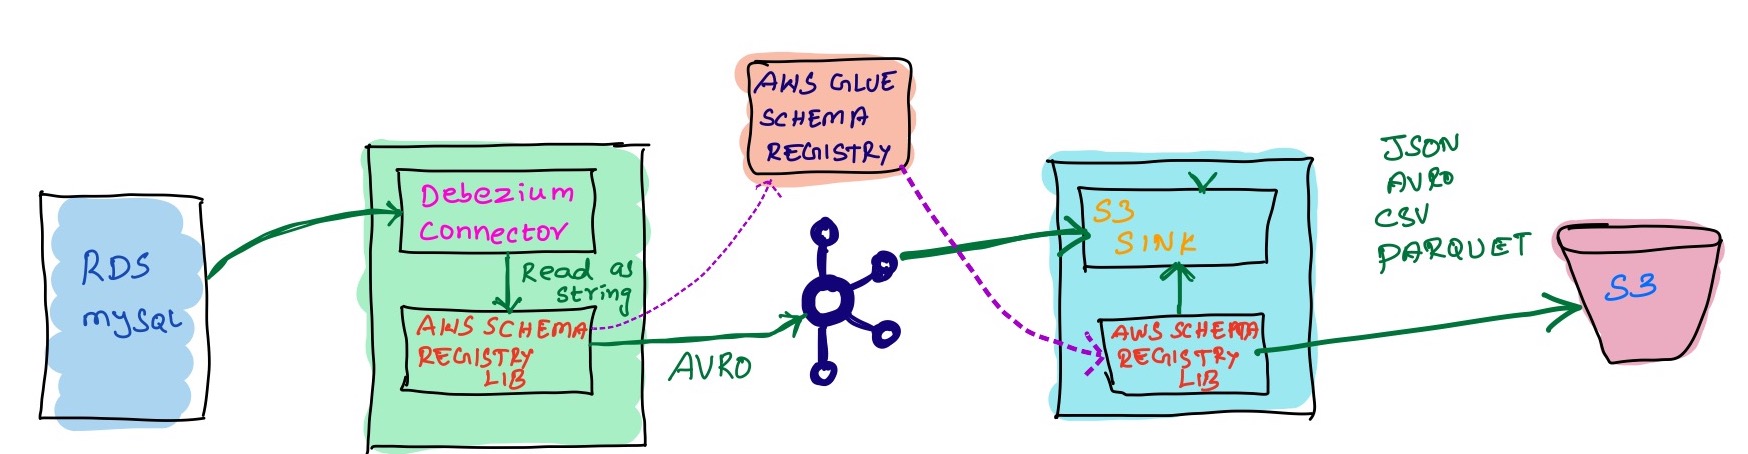 Integrate Debezium And Sink connectors With AWS Glue Schema Registry